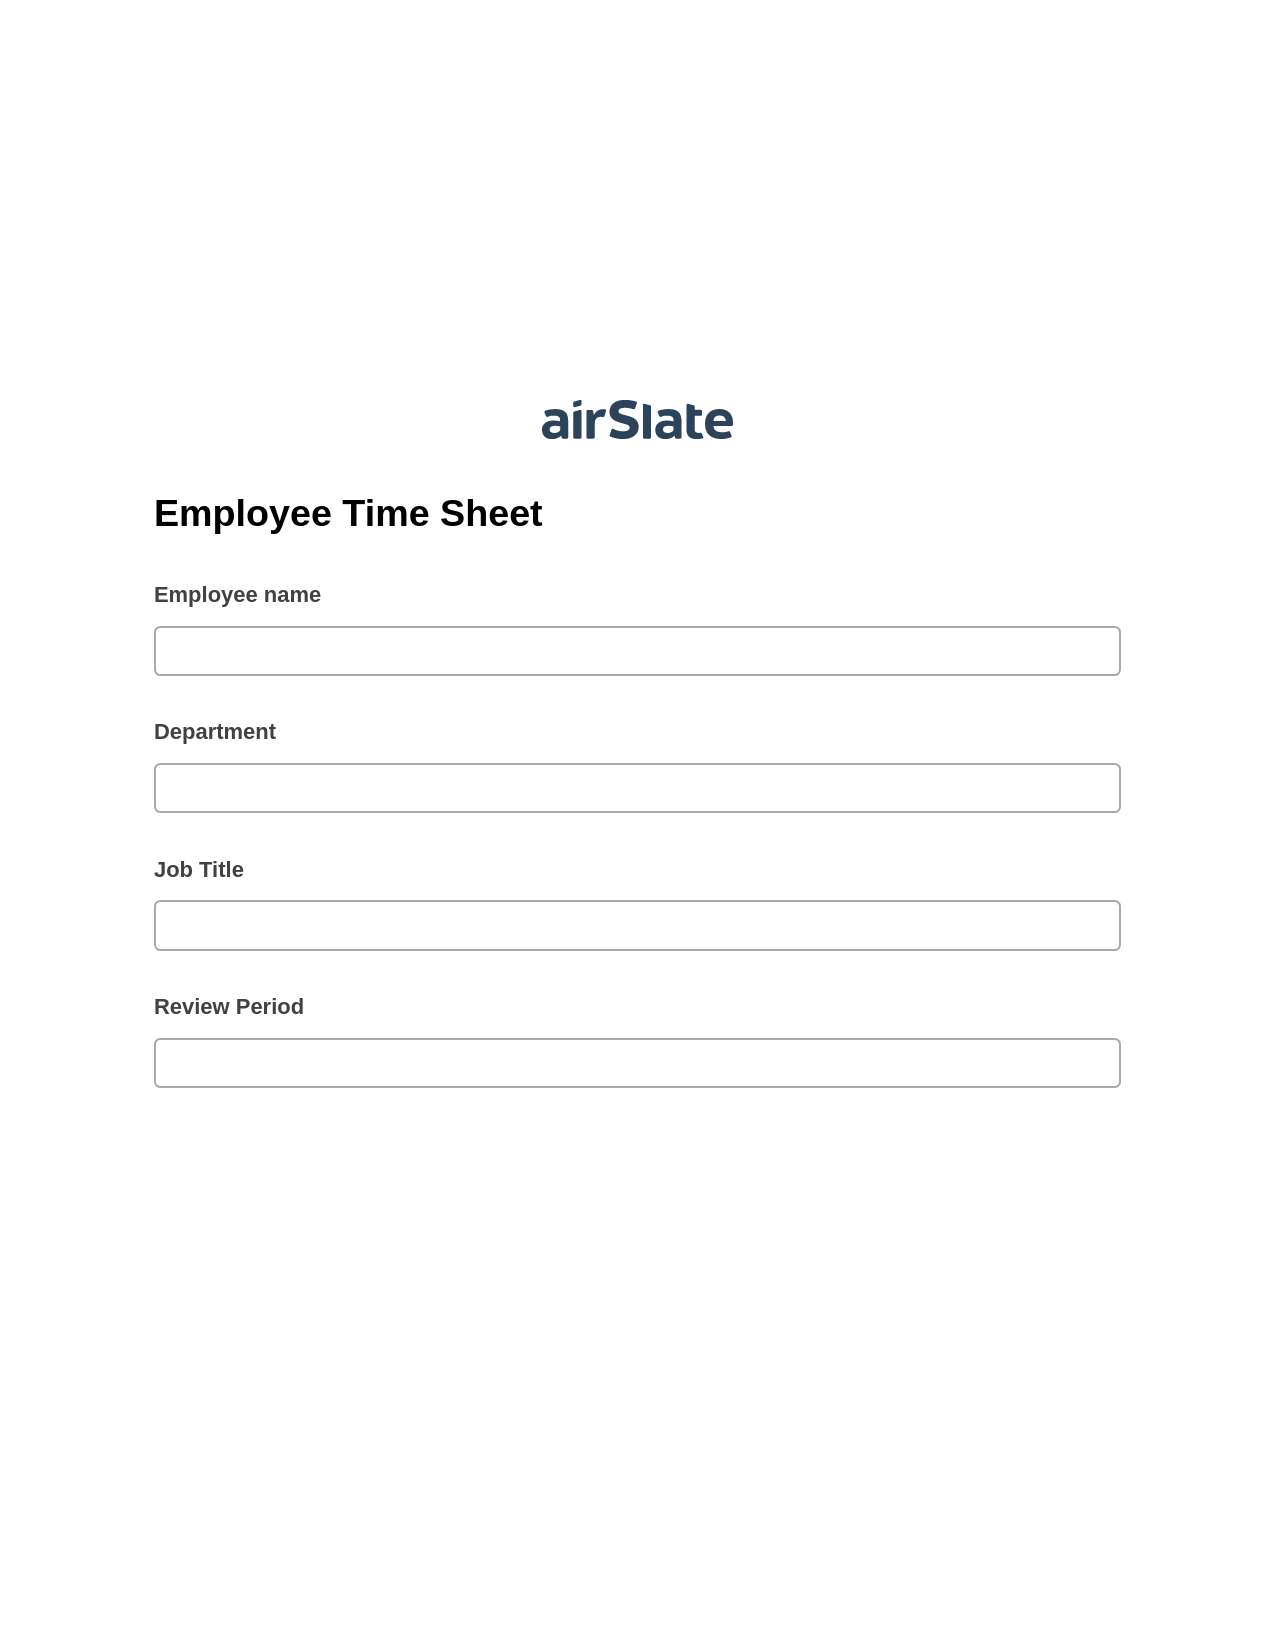 Multirole Employee Time Sheet Pre-fill from Salesforce Records with SOQL Bot, Create slate addon, Export to Salesforce Record Bot